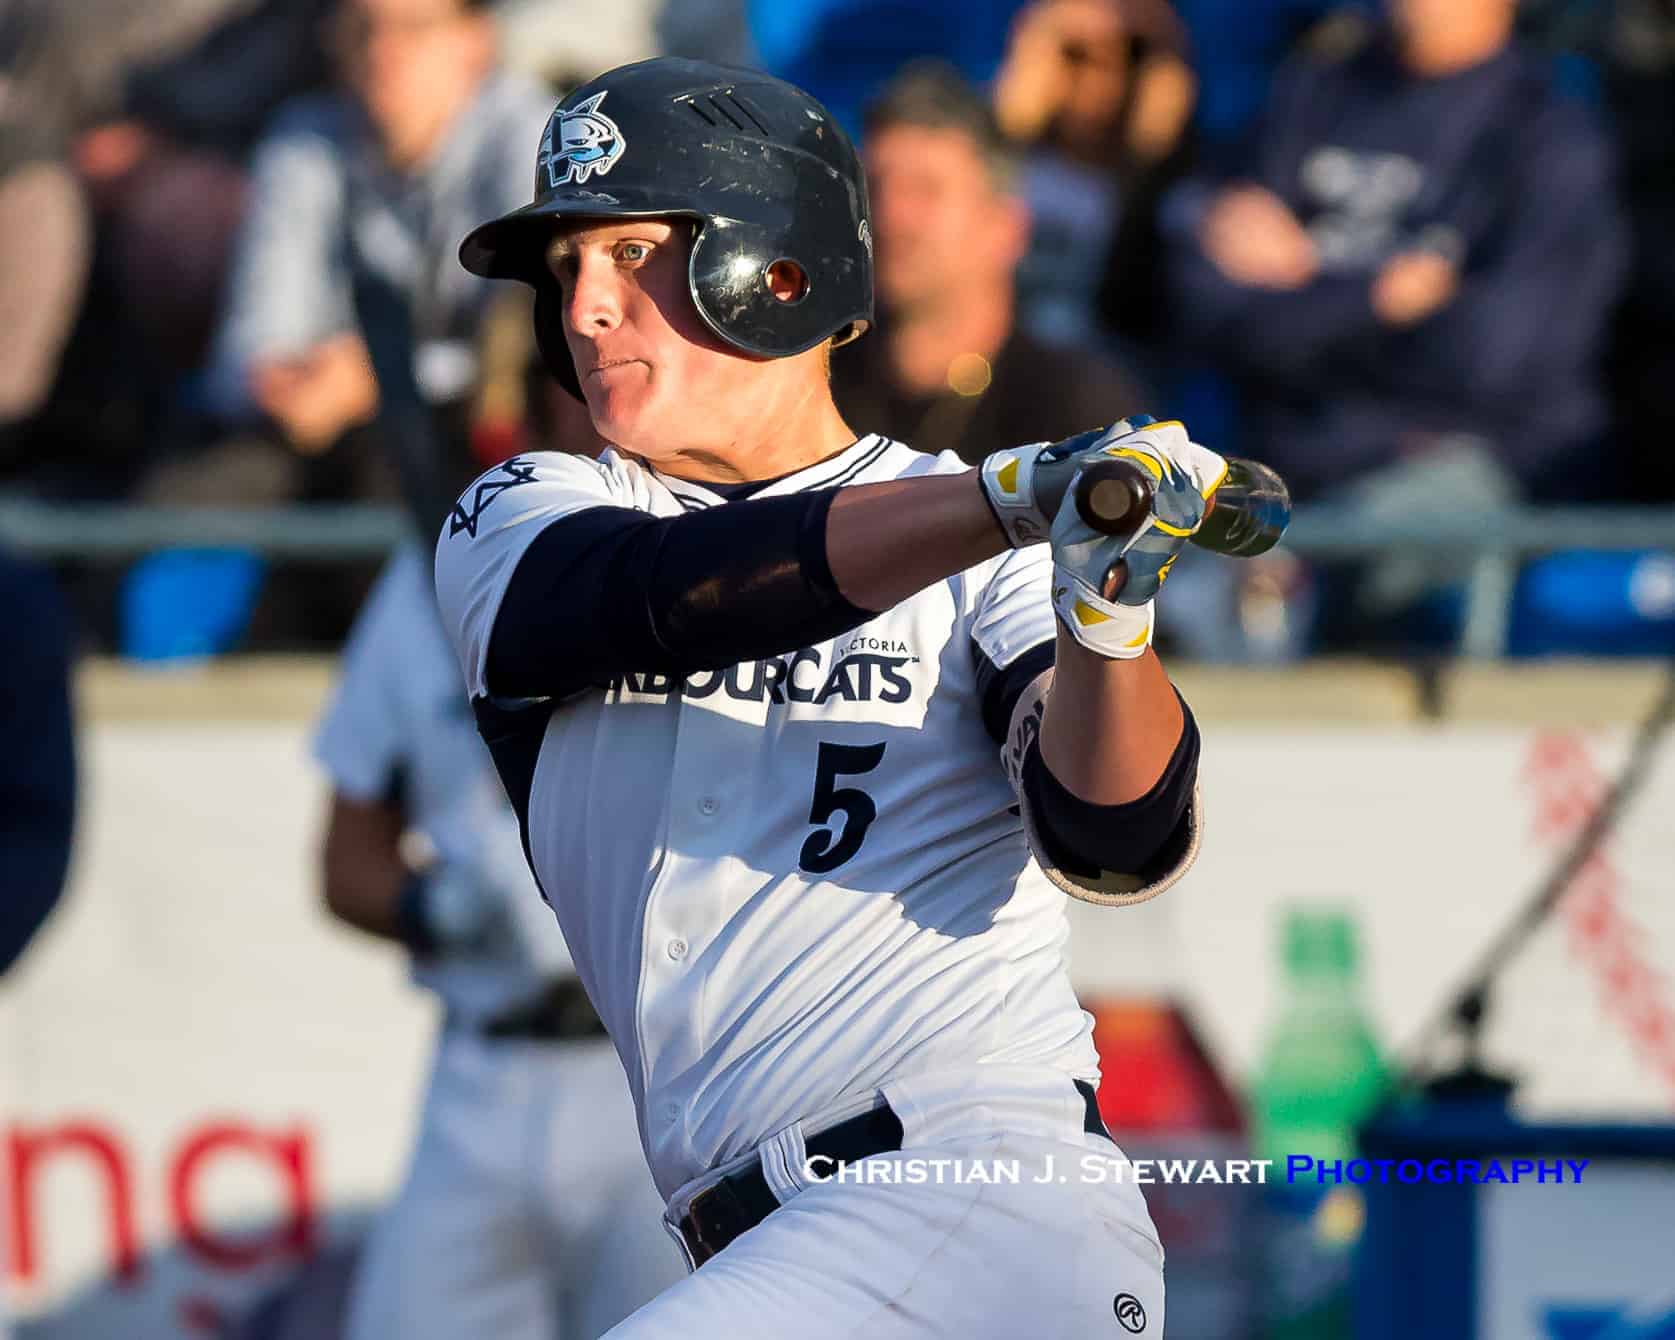 Seven Former HarbourCats to Participate in 2021 MLB Spring Training Camps